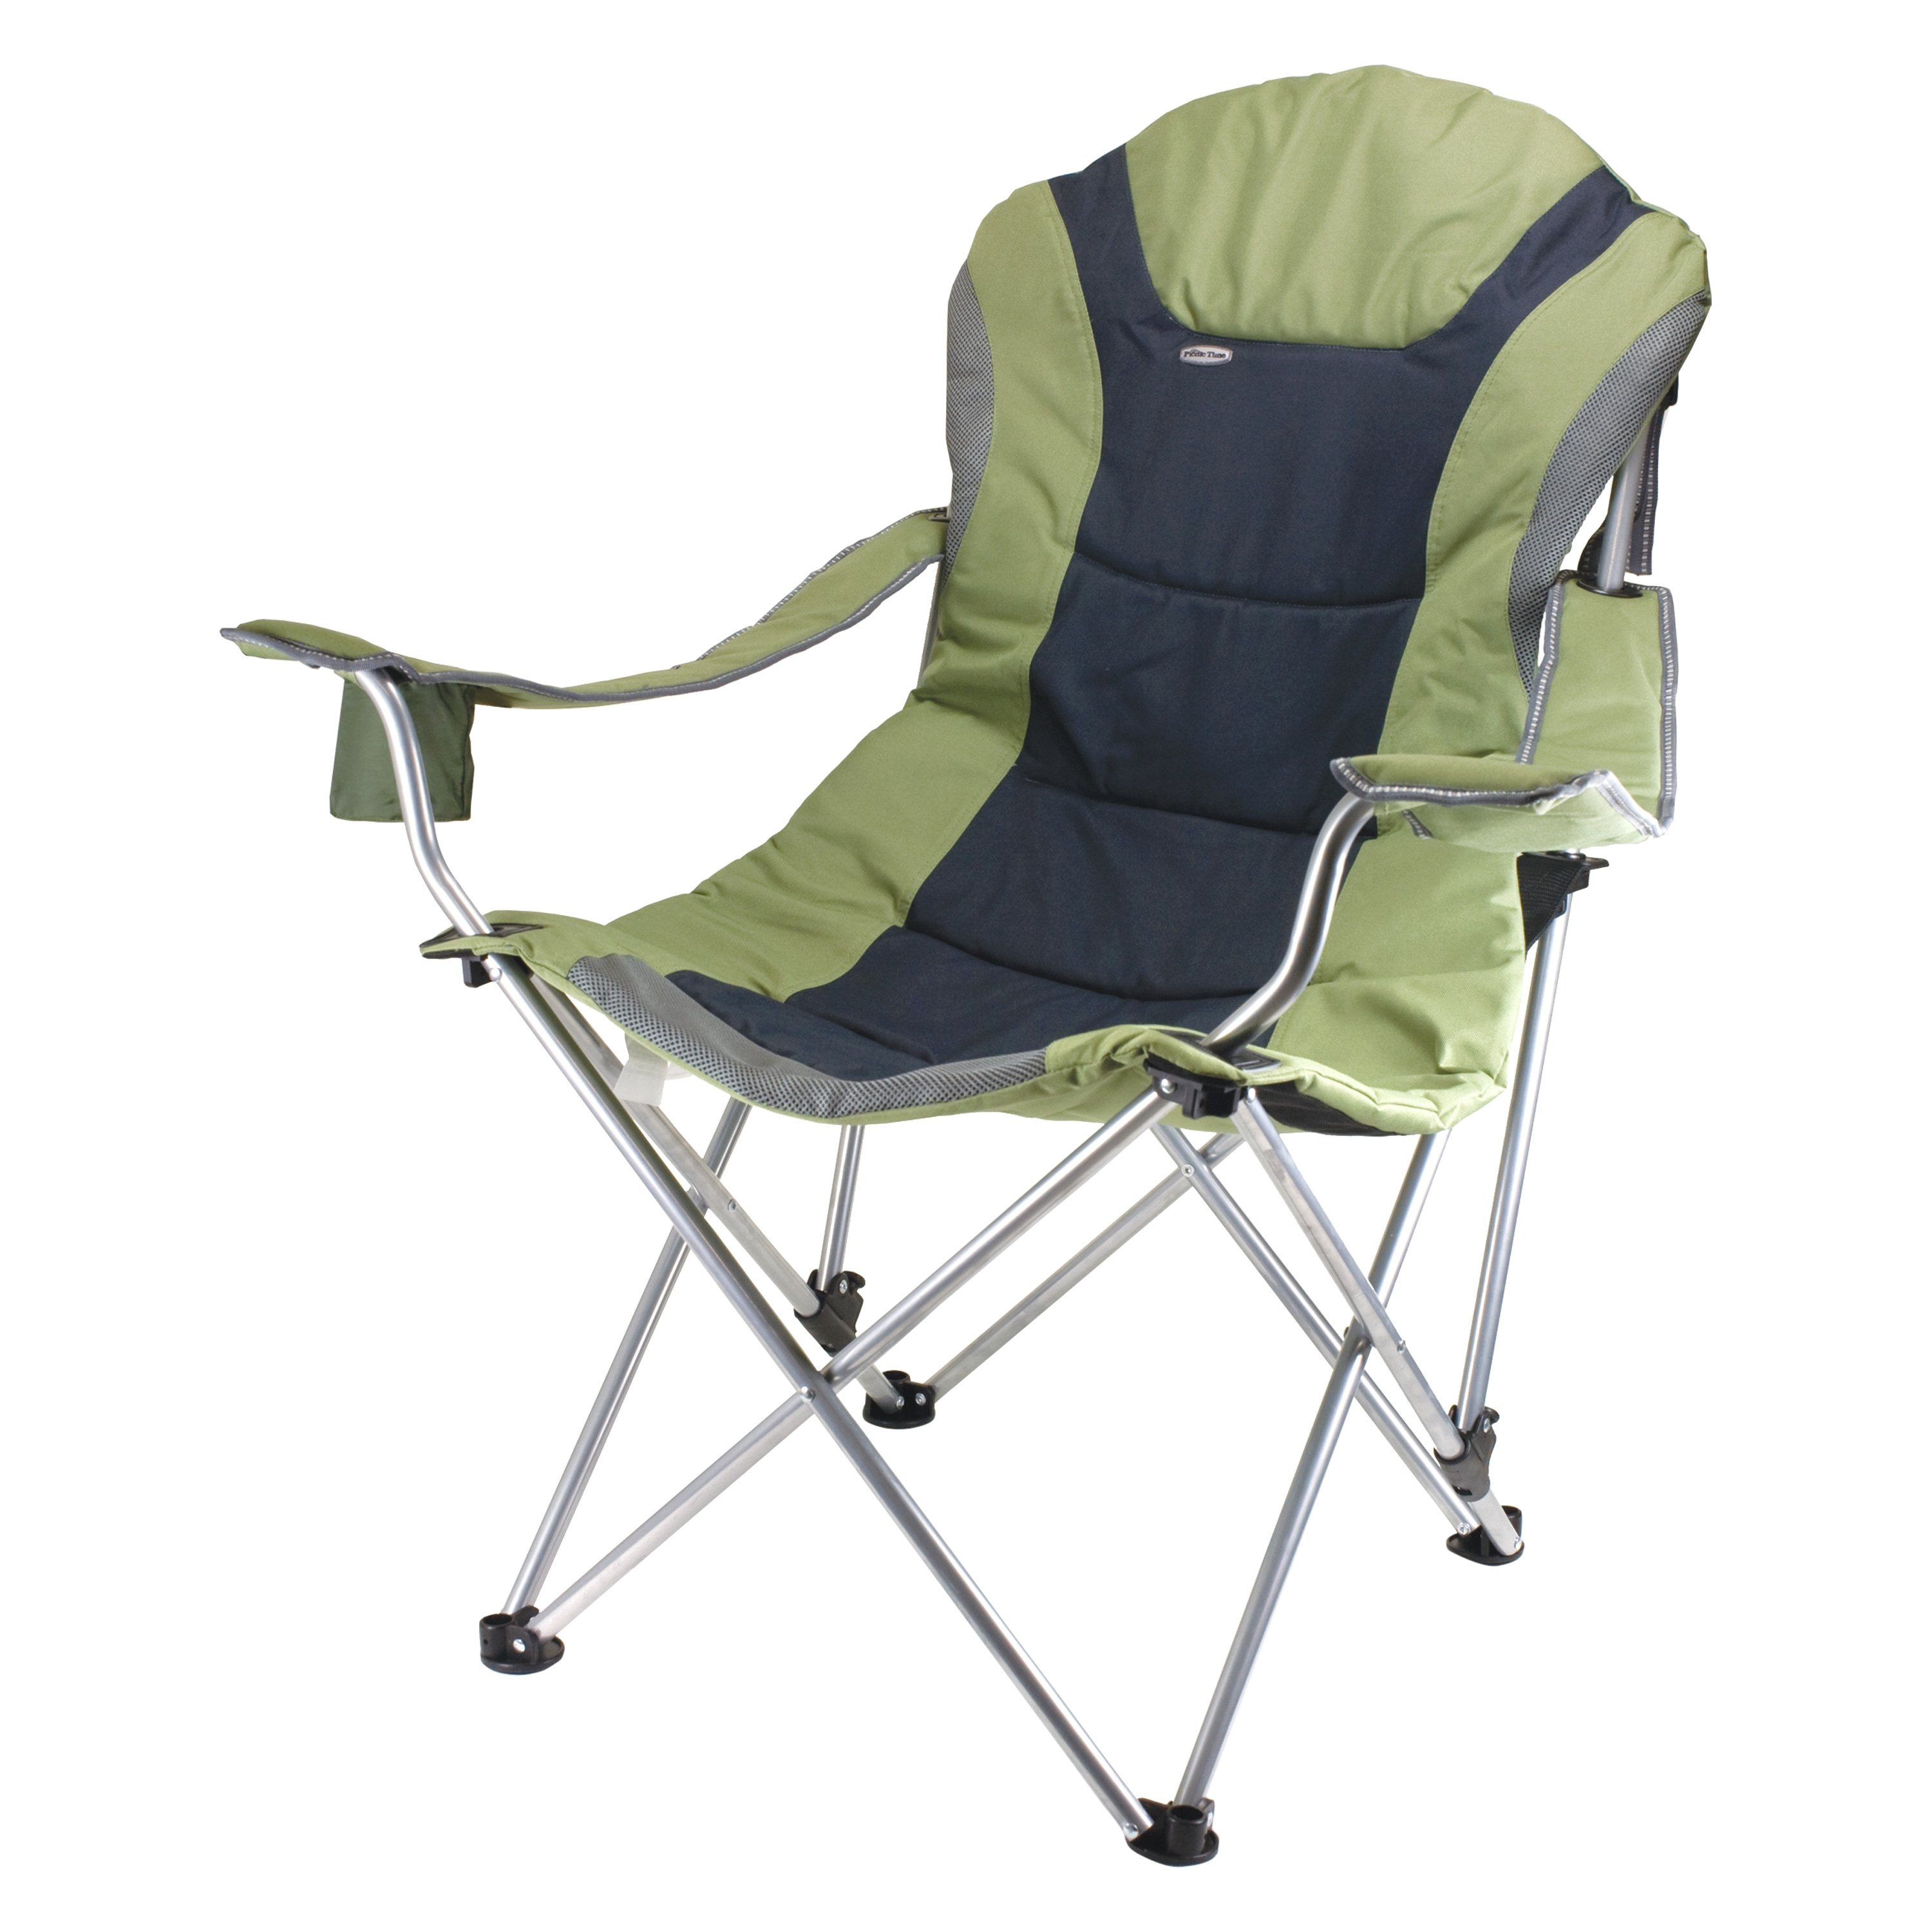 Picnic Time® 803 00 130 000 0 Reclining Sage Green Chair